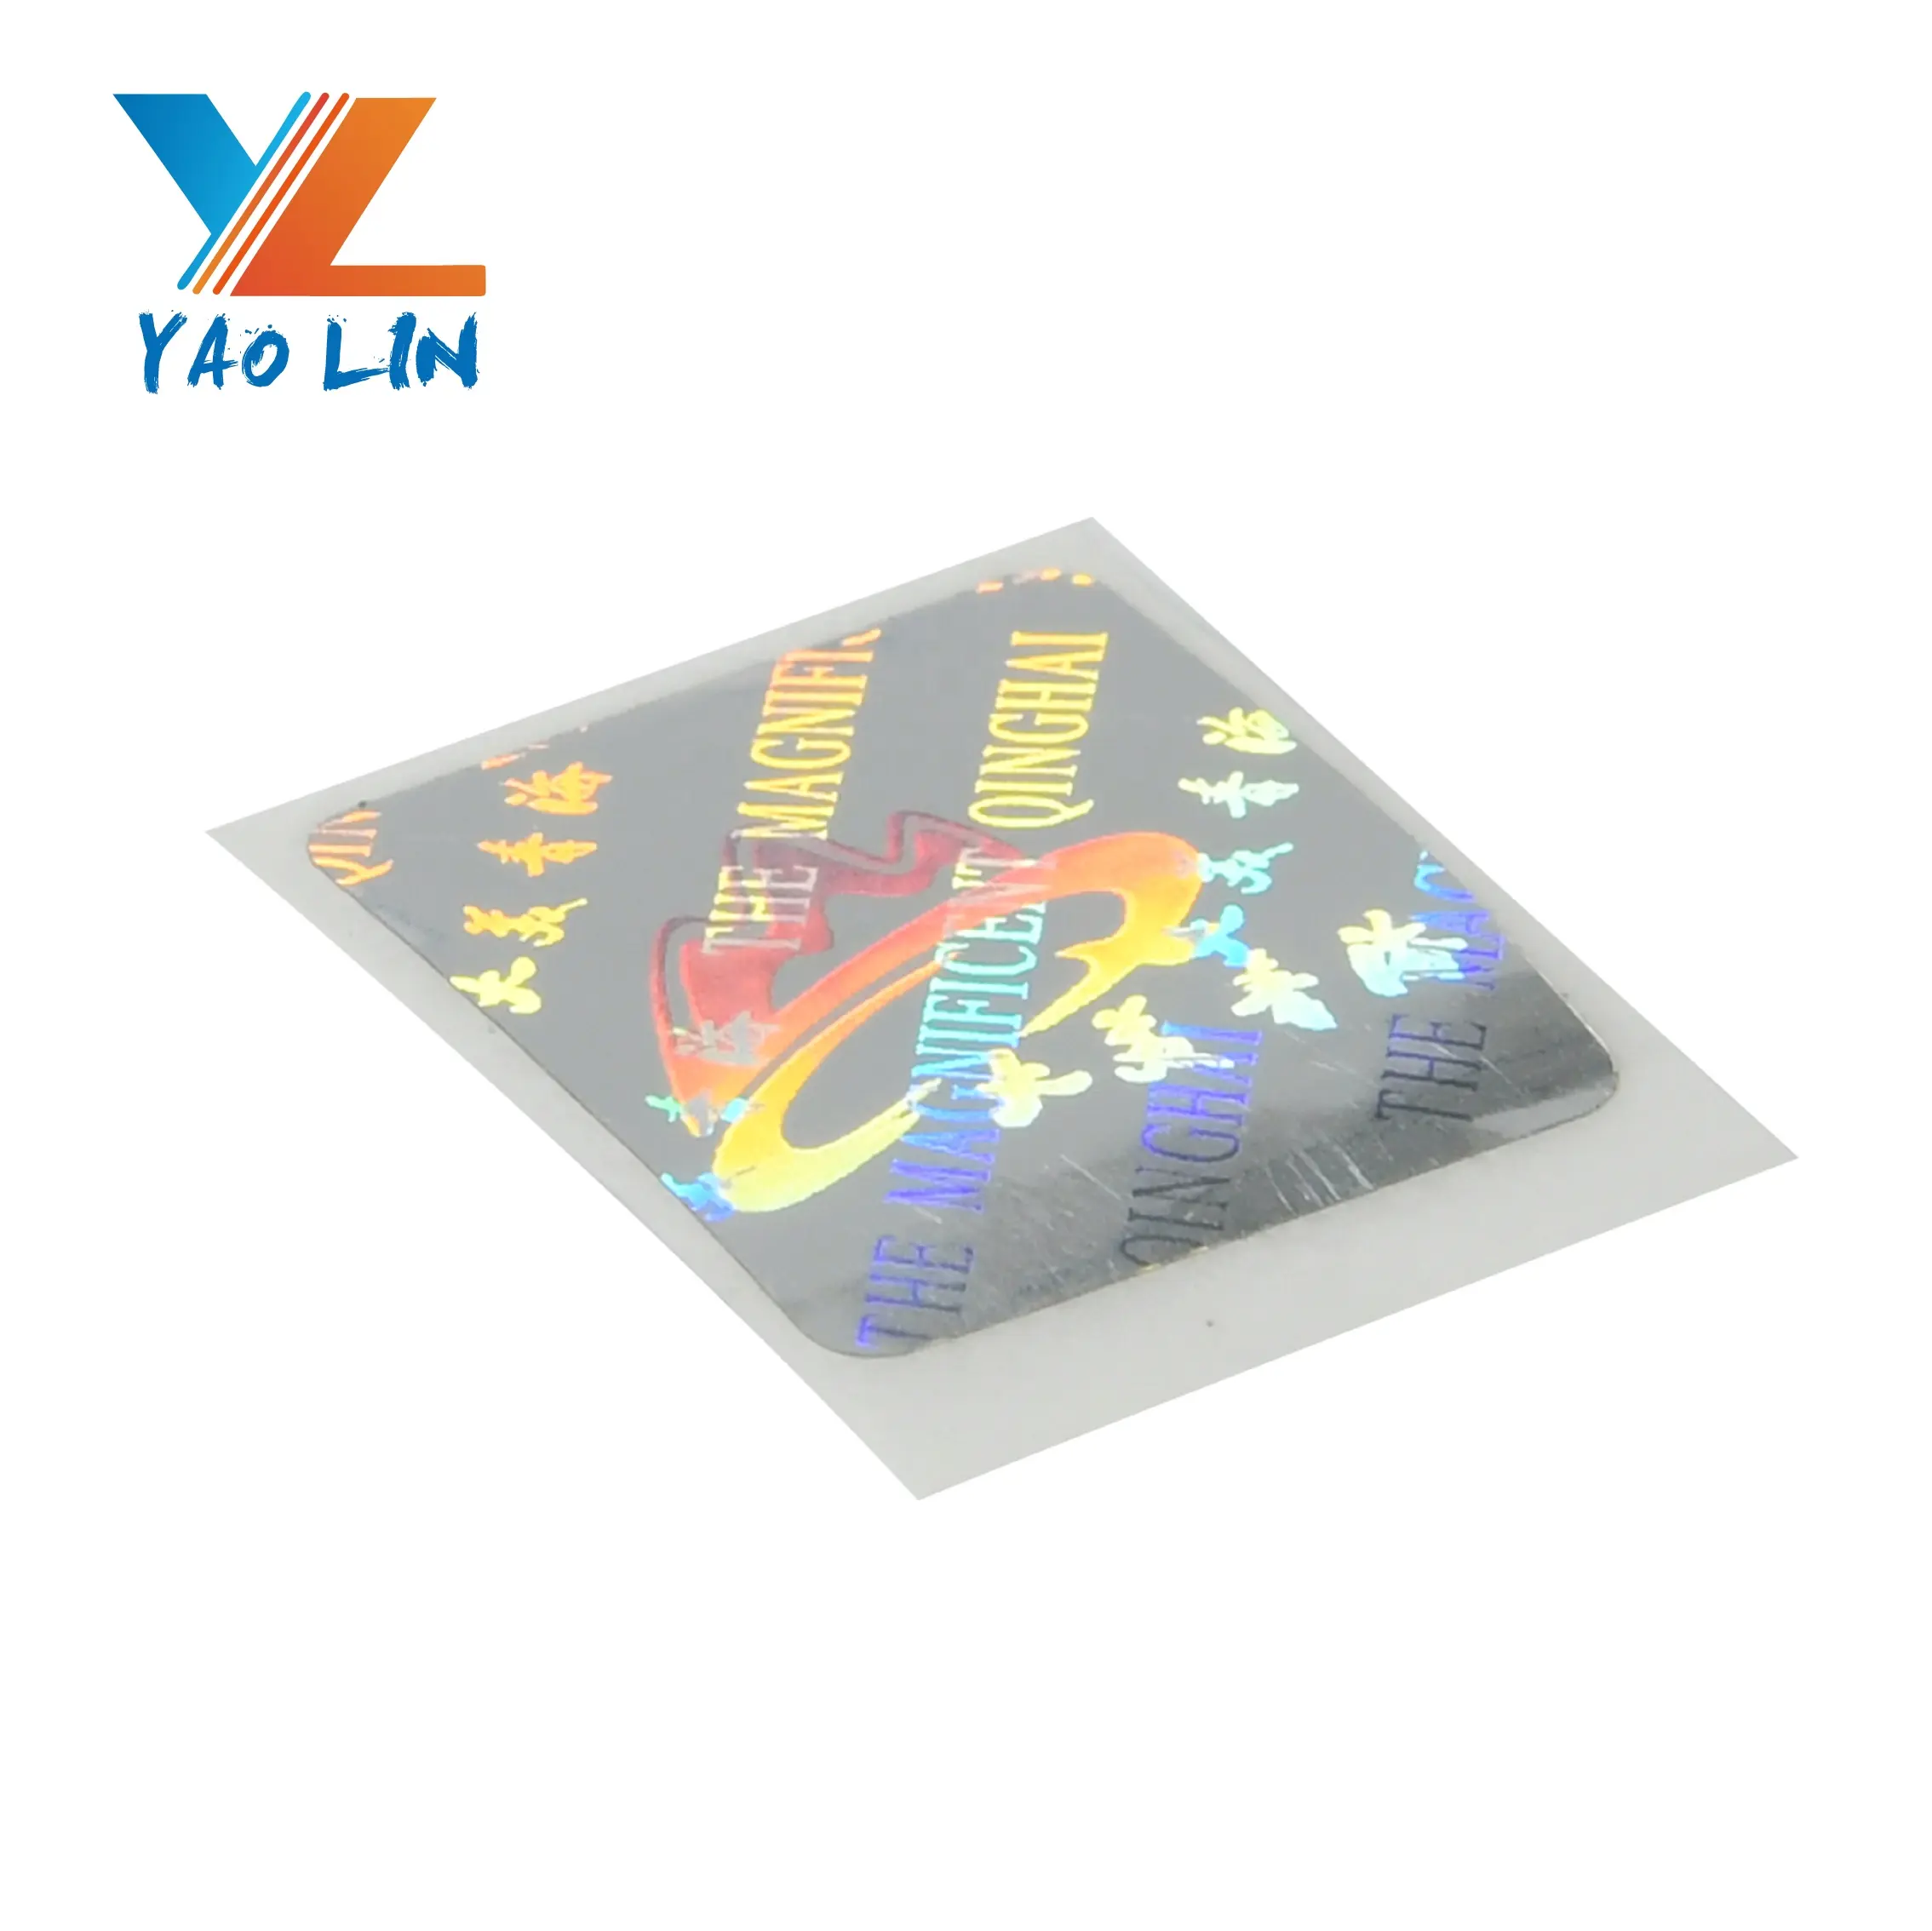 Make Hologram Holographic Vinyl Stickers For Certificate Deca 200mg/ml Vial Label Sticker for packing label